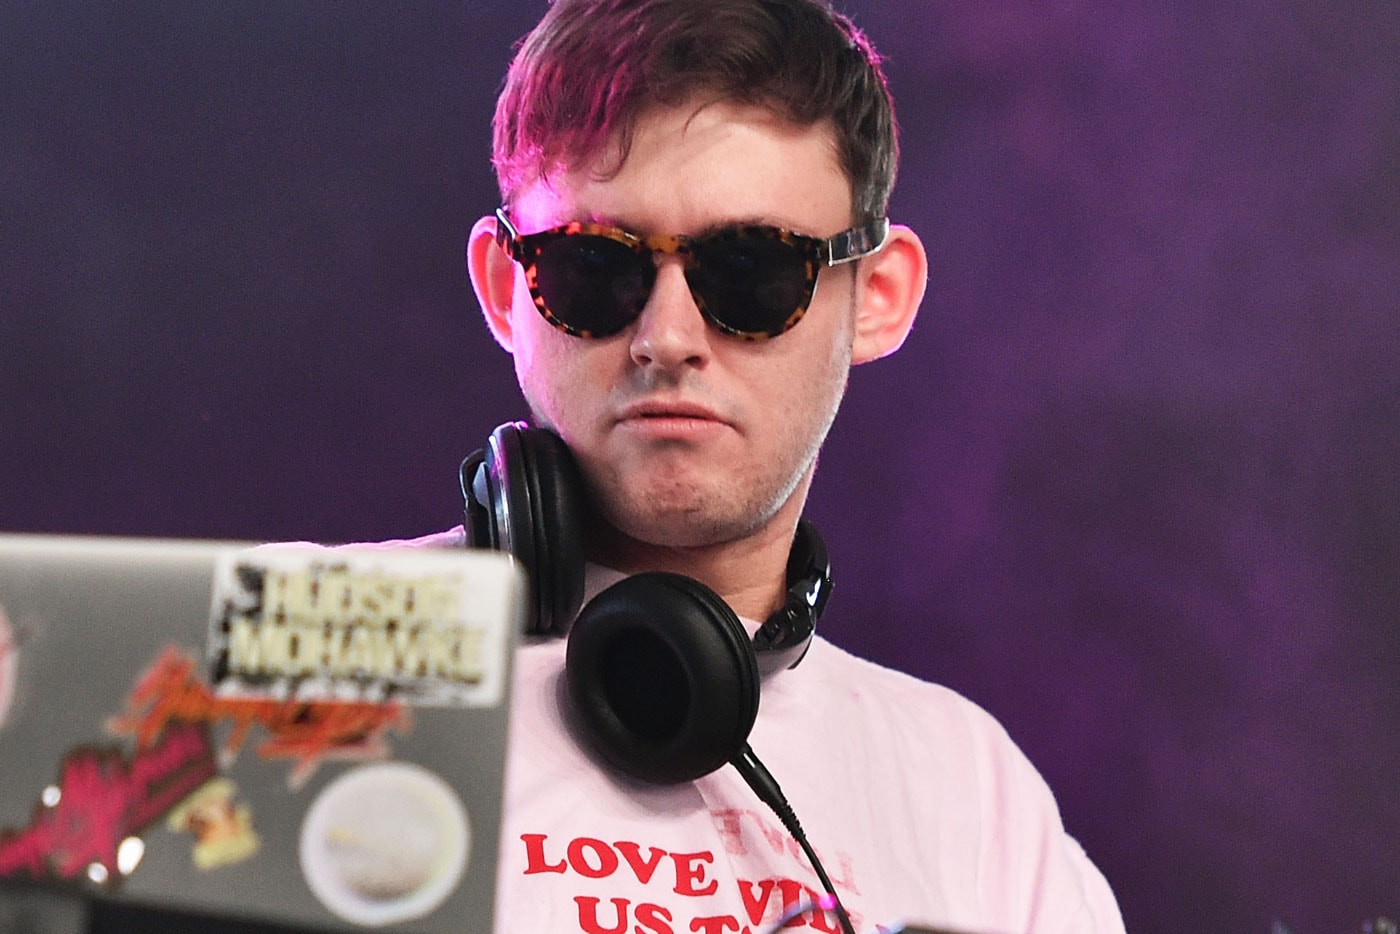 Hudson Mohawke Shares New Video for "System"